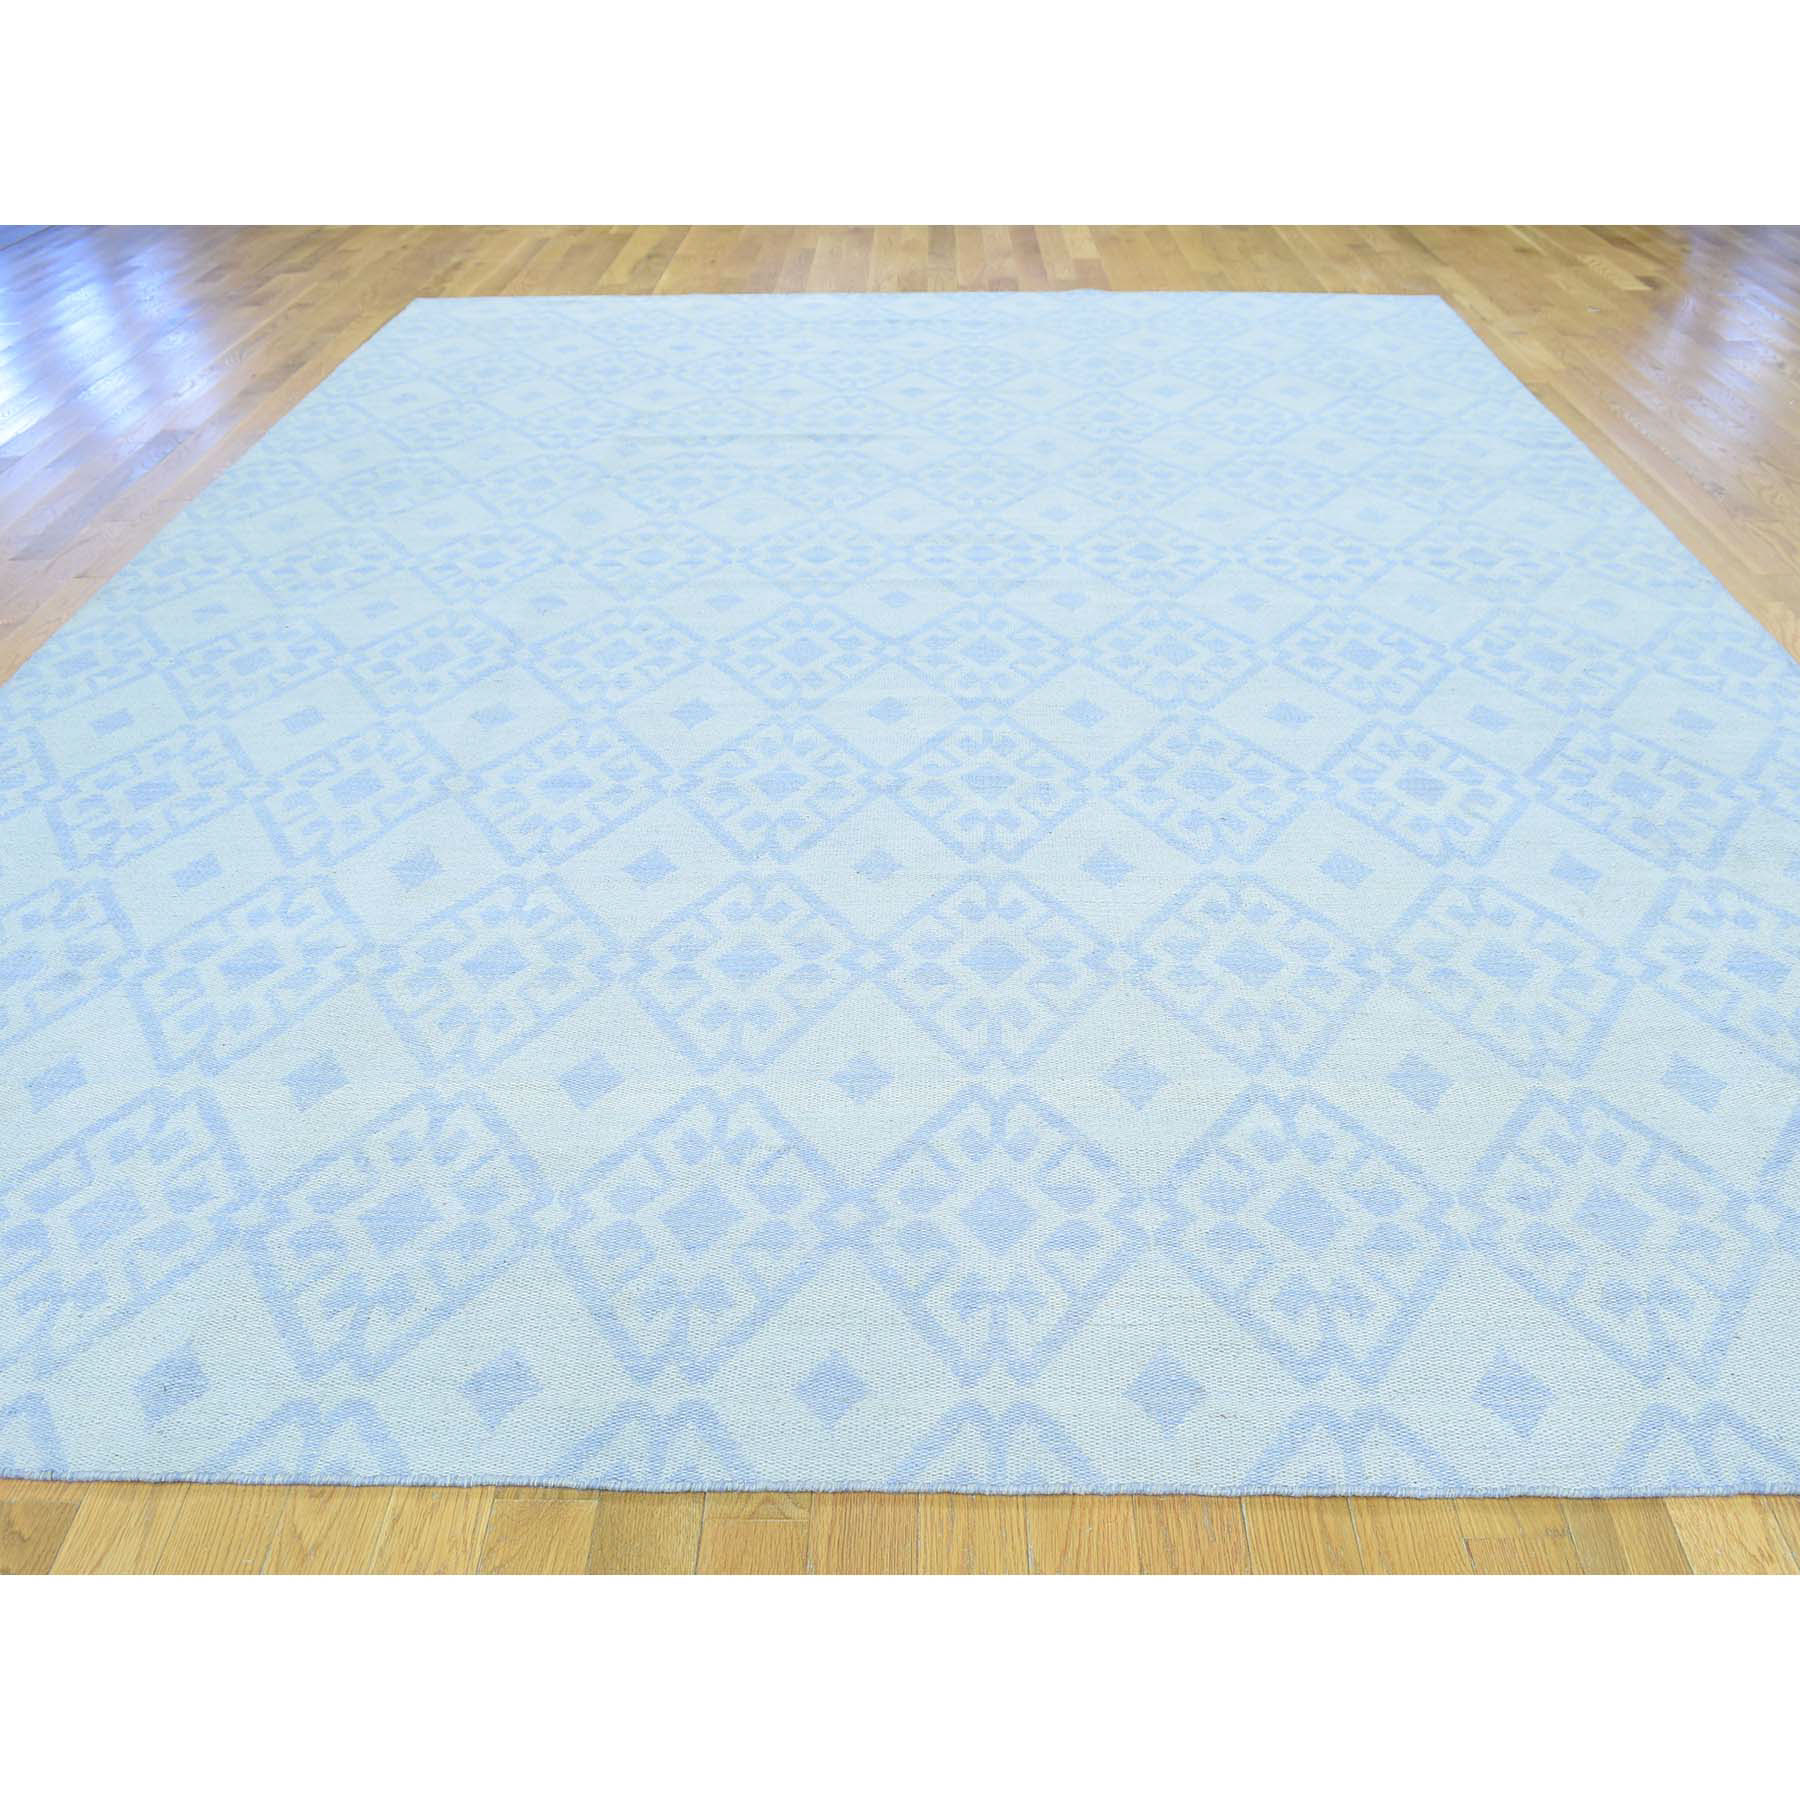 9-x12-1  Flat Weave Hand Woven Reversible Durie Kilim Oriental Rug 